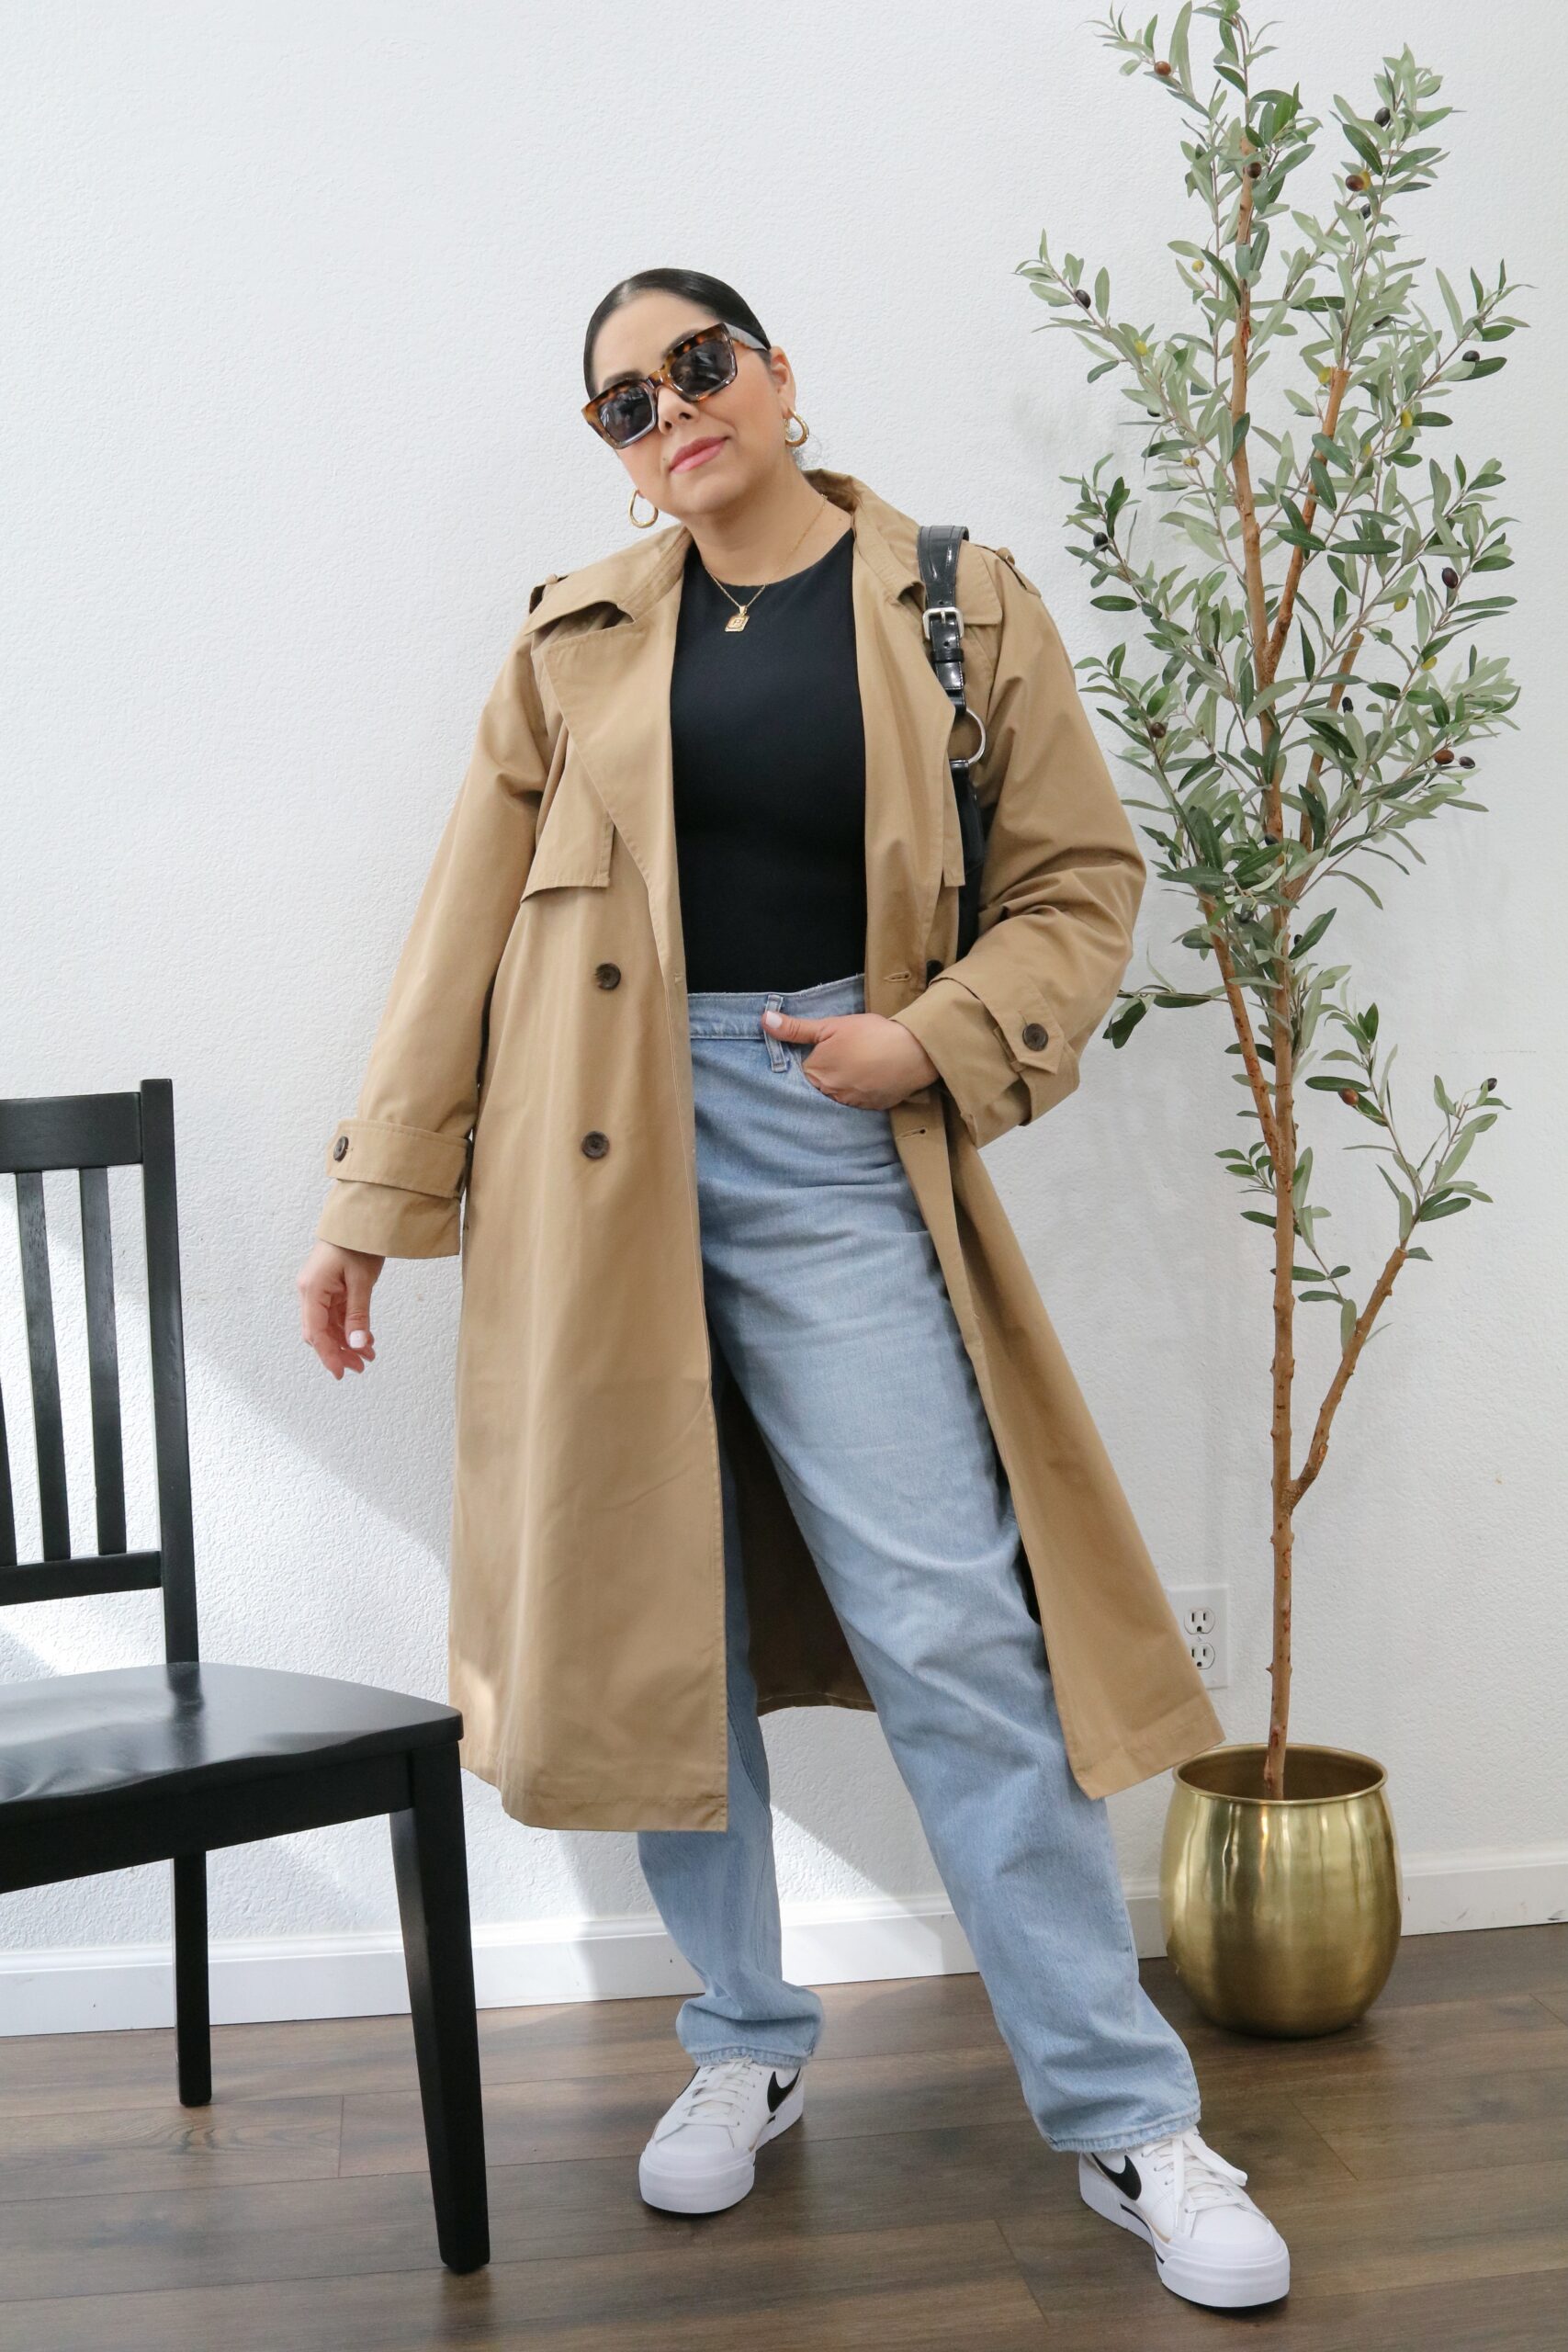 how to style a trench coat, trench coat with jeans and sneakers outfit, casual chic outfit